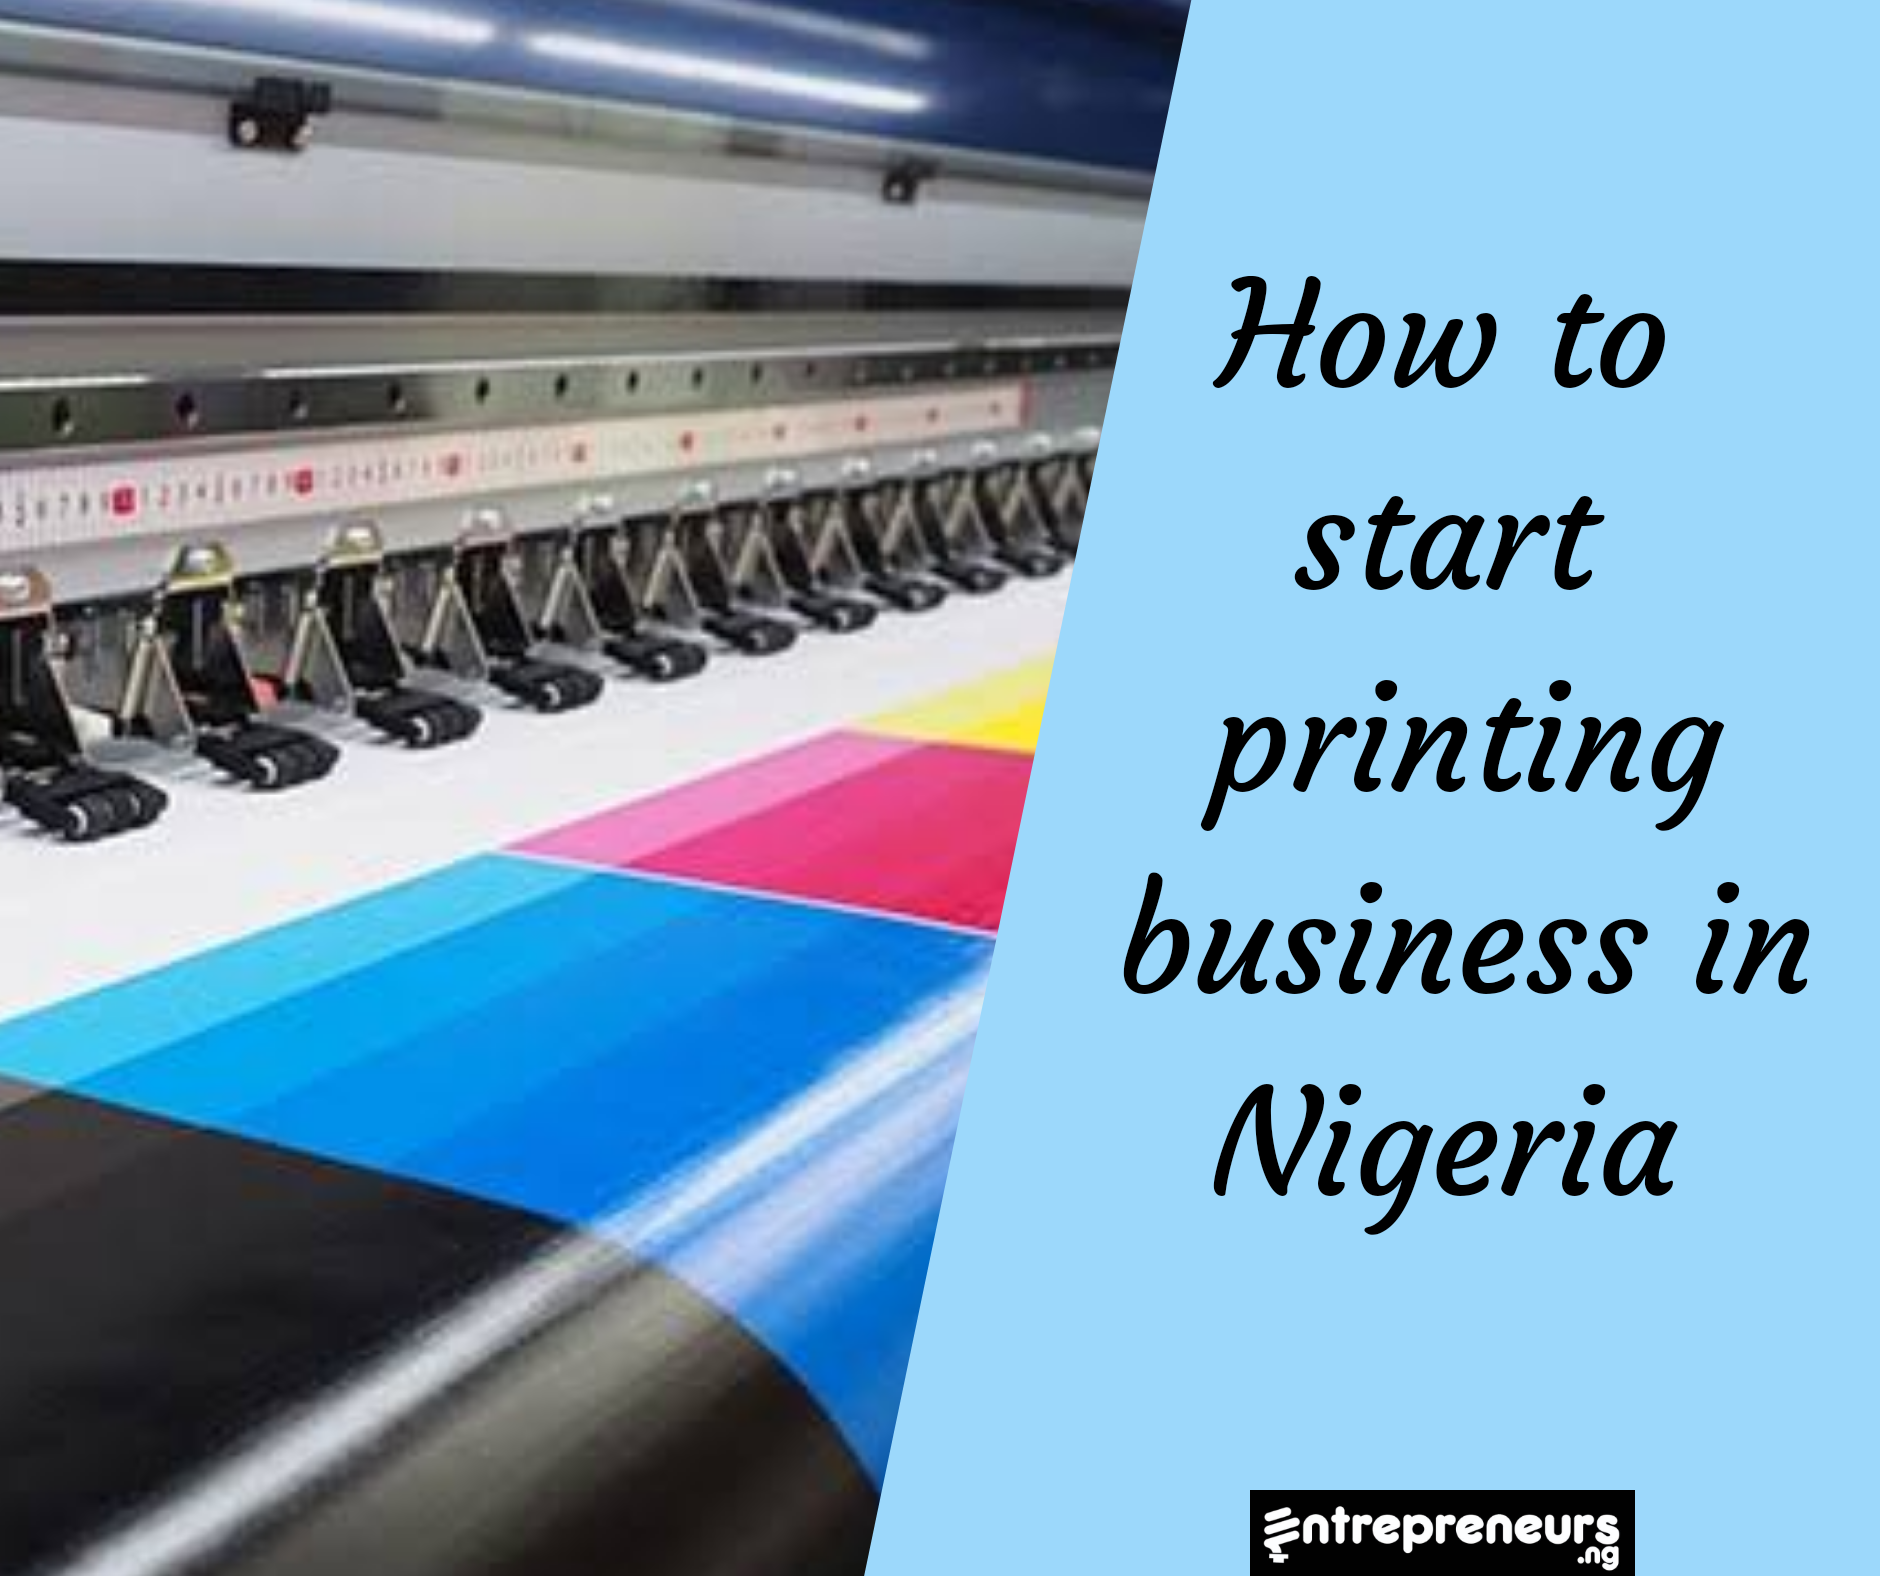 printing-business-guide-on-how-to-start-a-successful-printing-business